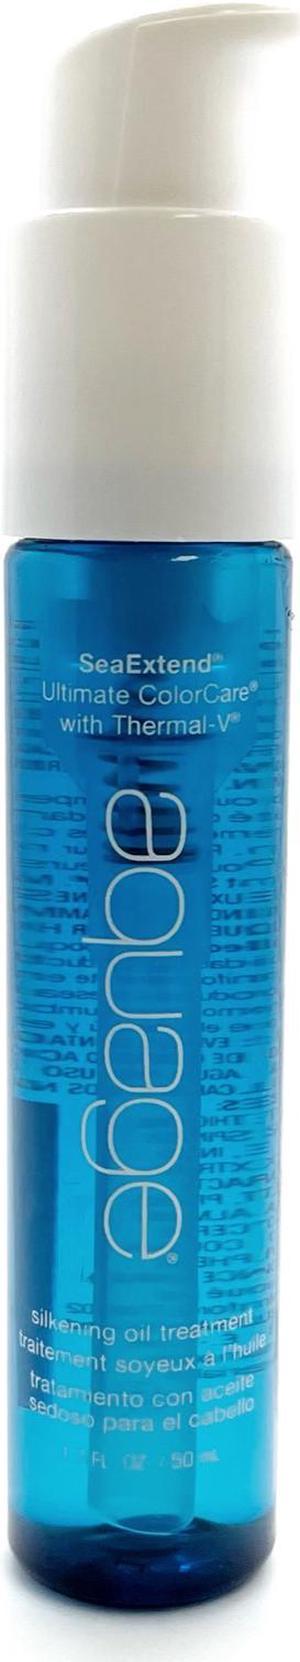 Seaextend Ultimate Colorcare Silkening Oil Treatment by Aquage for Unisex - 1.7 oz Treatment